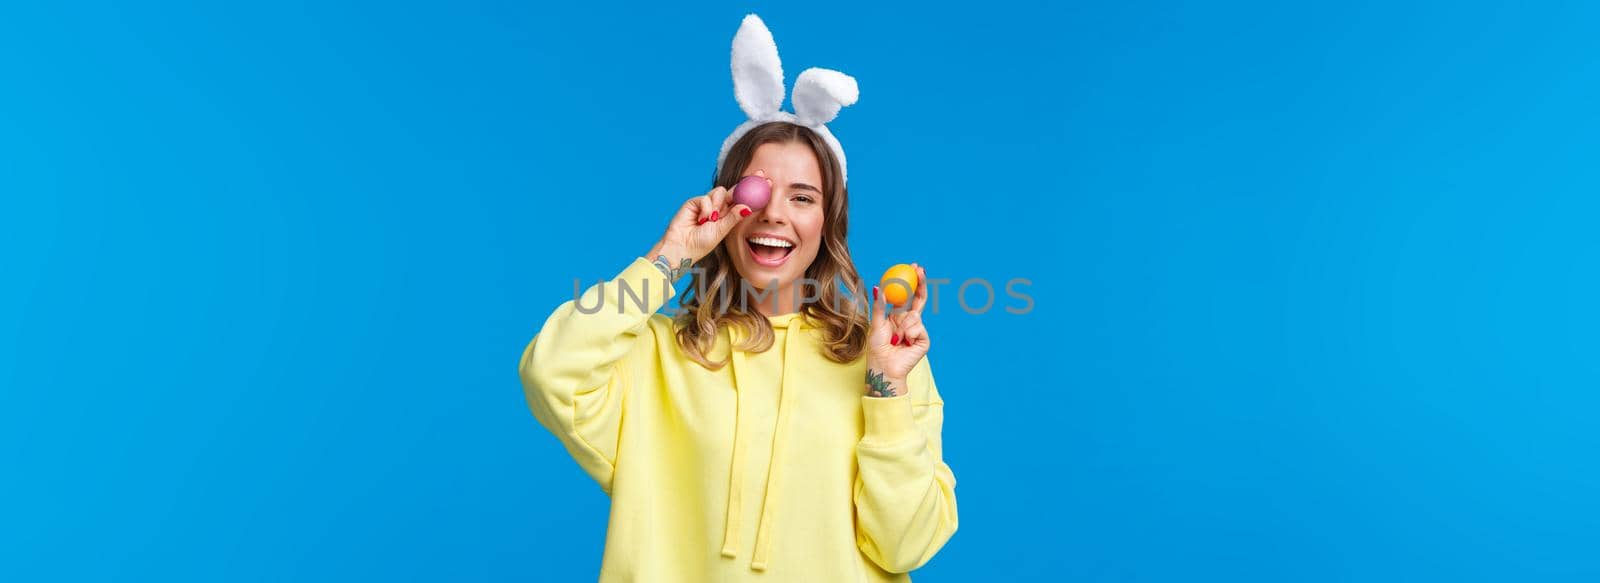 Holidays, traditions and celebration concept. Happy cheerful young pretty female celebrating Easter day, showing two painted eggs and laughing, wearing cute rabbit ears, blue background.